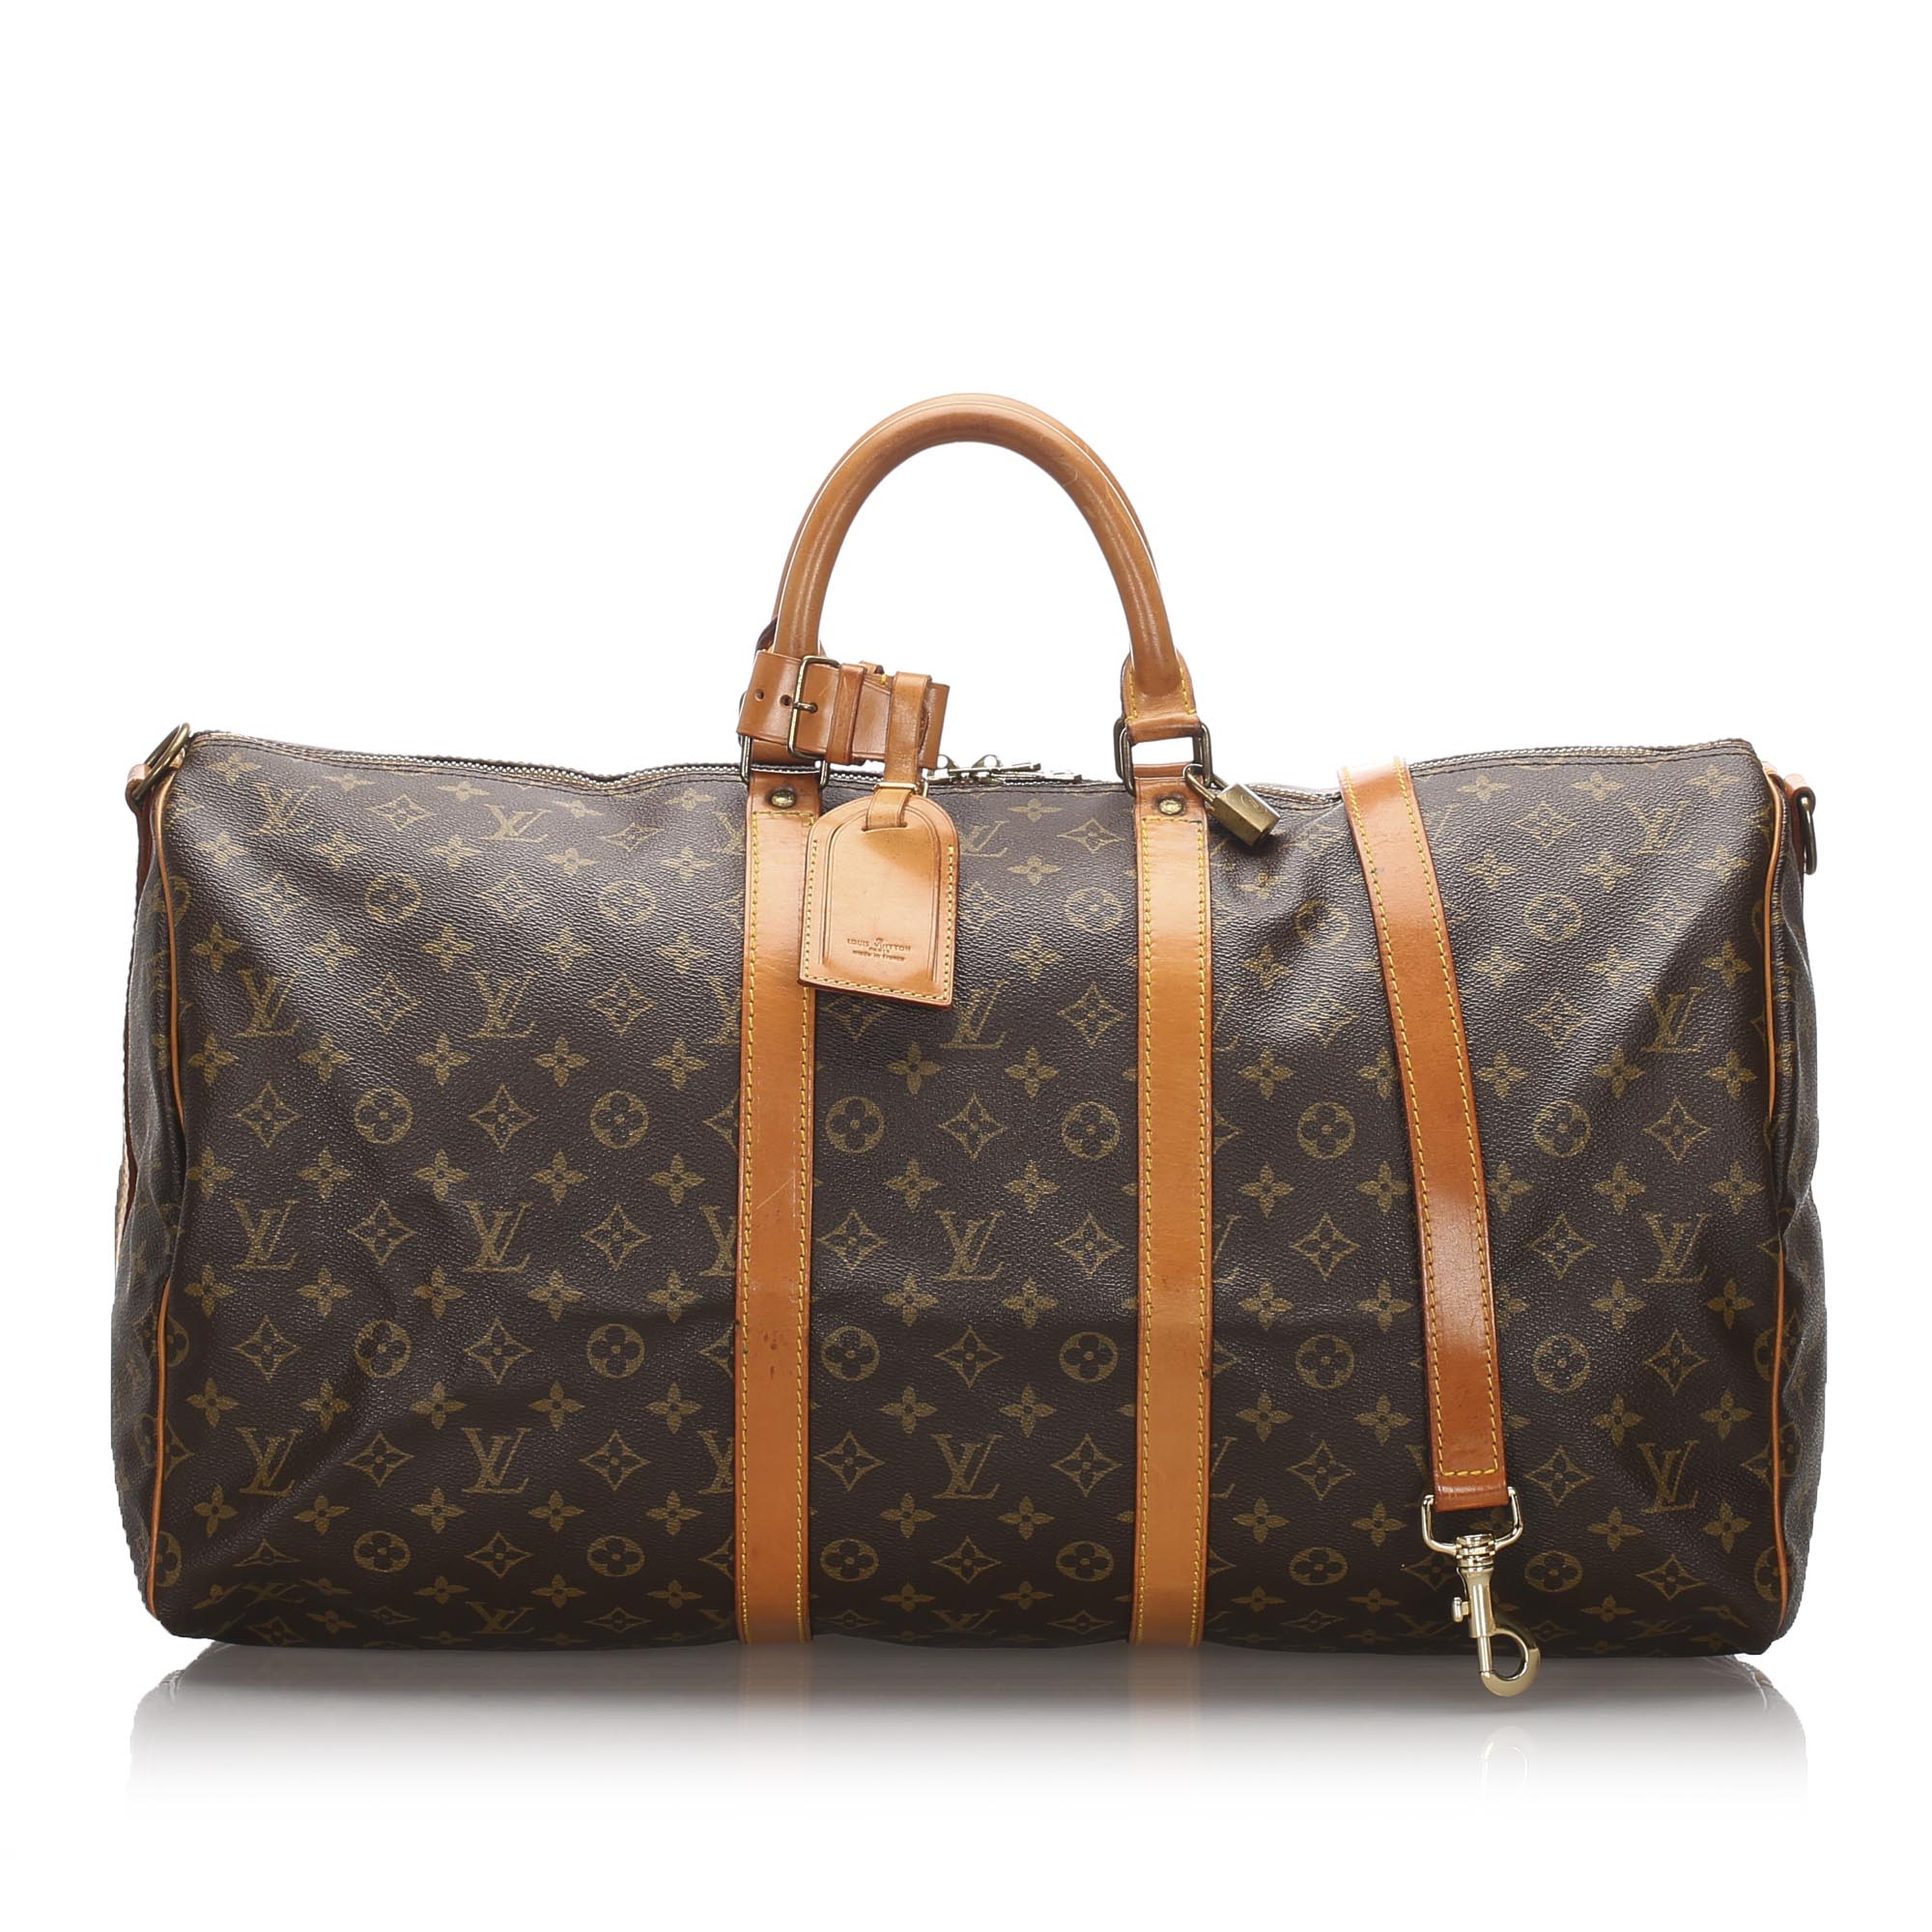 Pre-Loved Louis Vuitton Brown Monogram Keepall Bandouliere 55 France | eBay